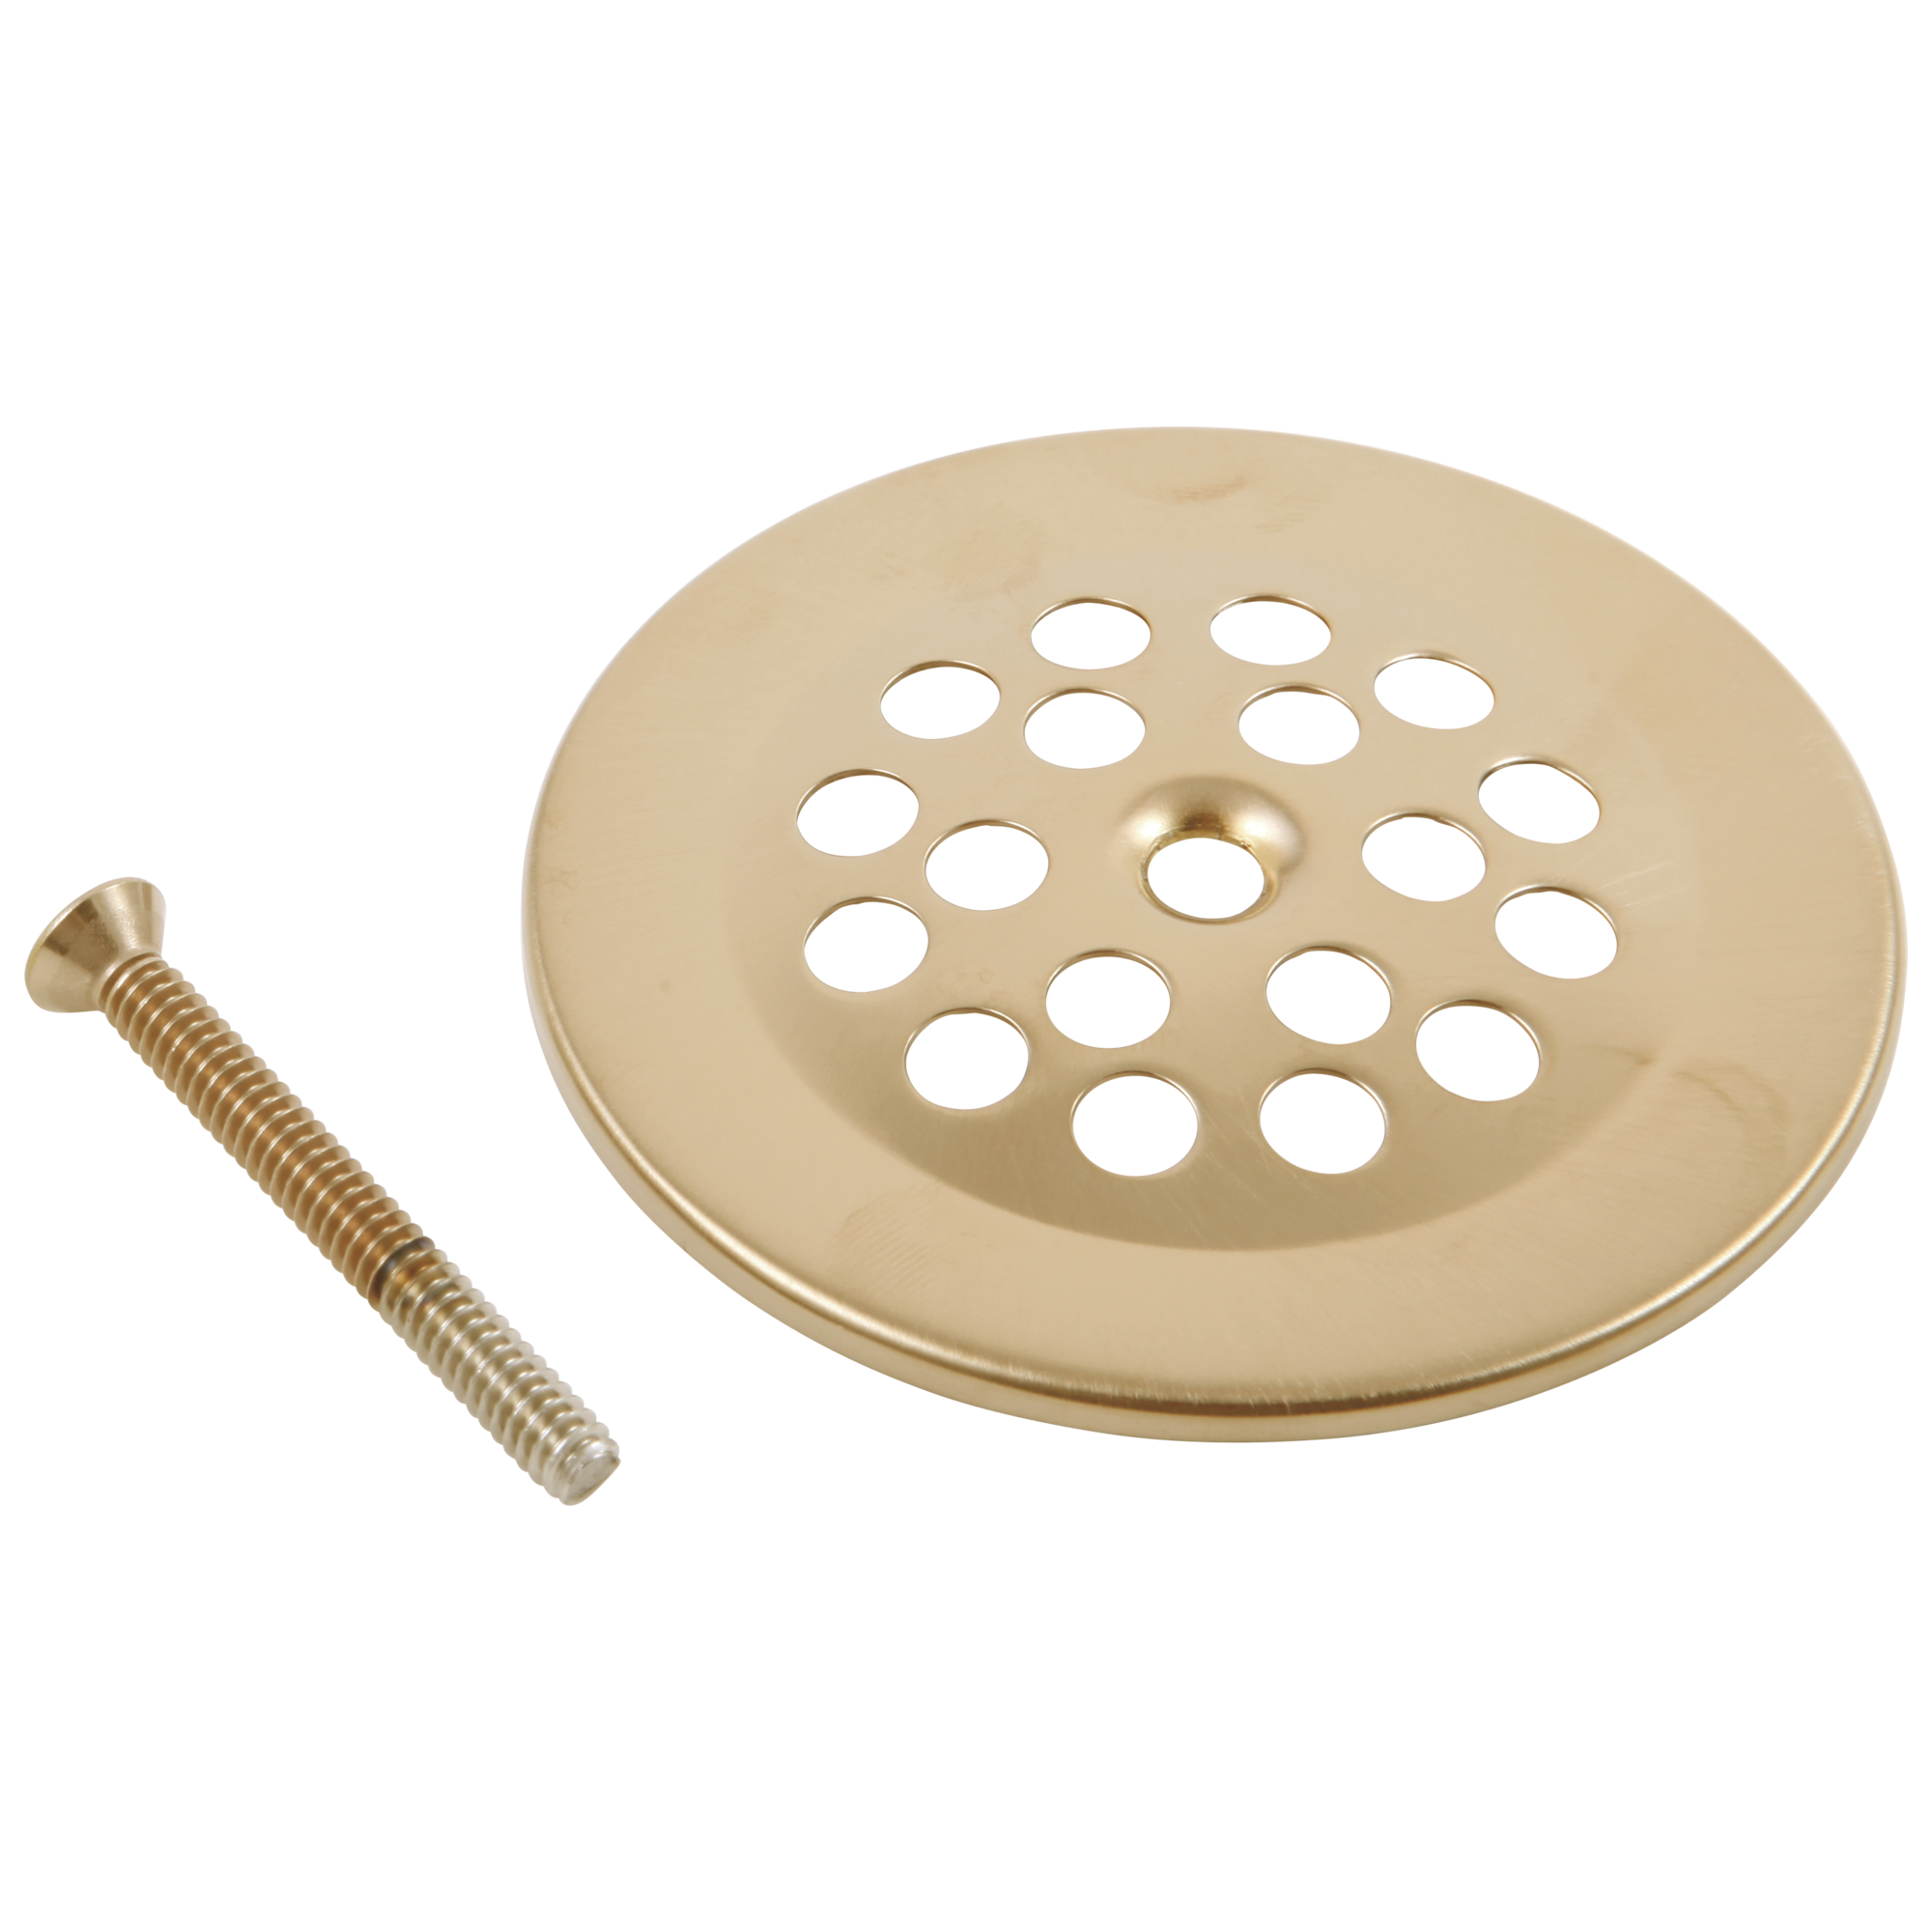 Delta RP7430 Dome Strainer with Screw